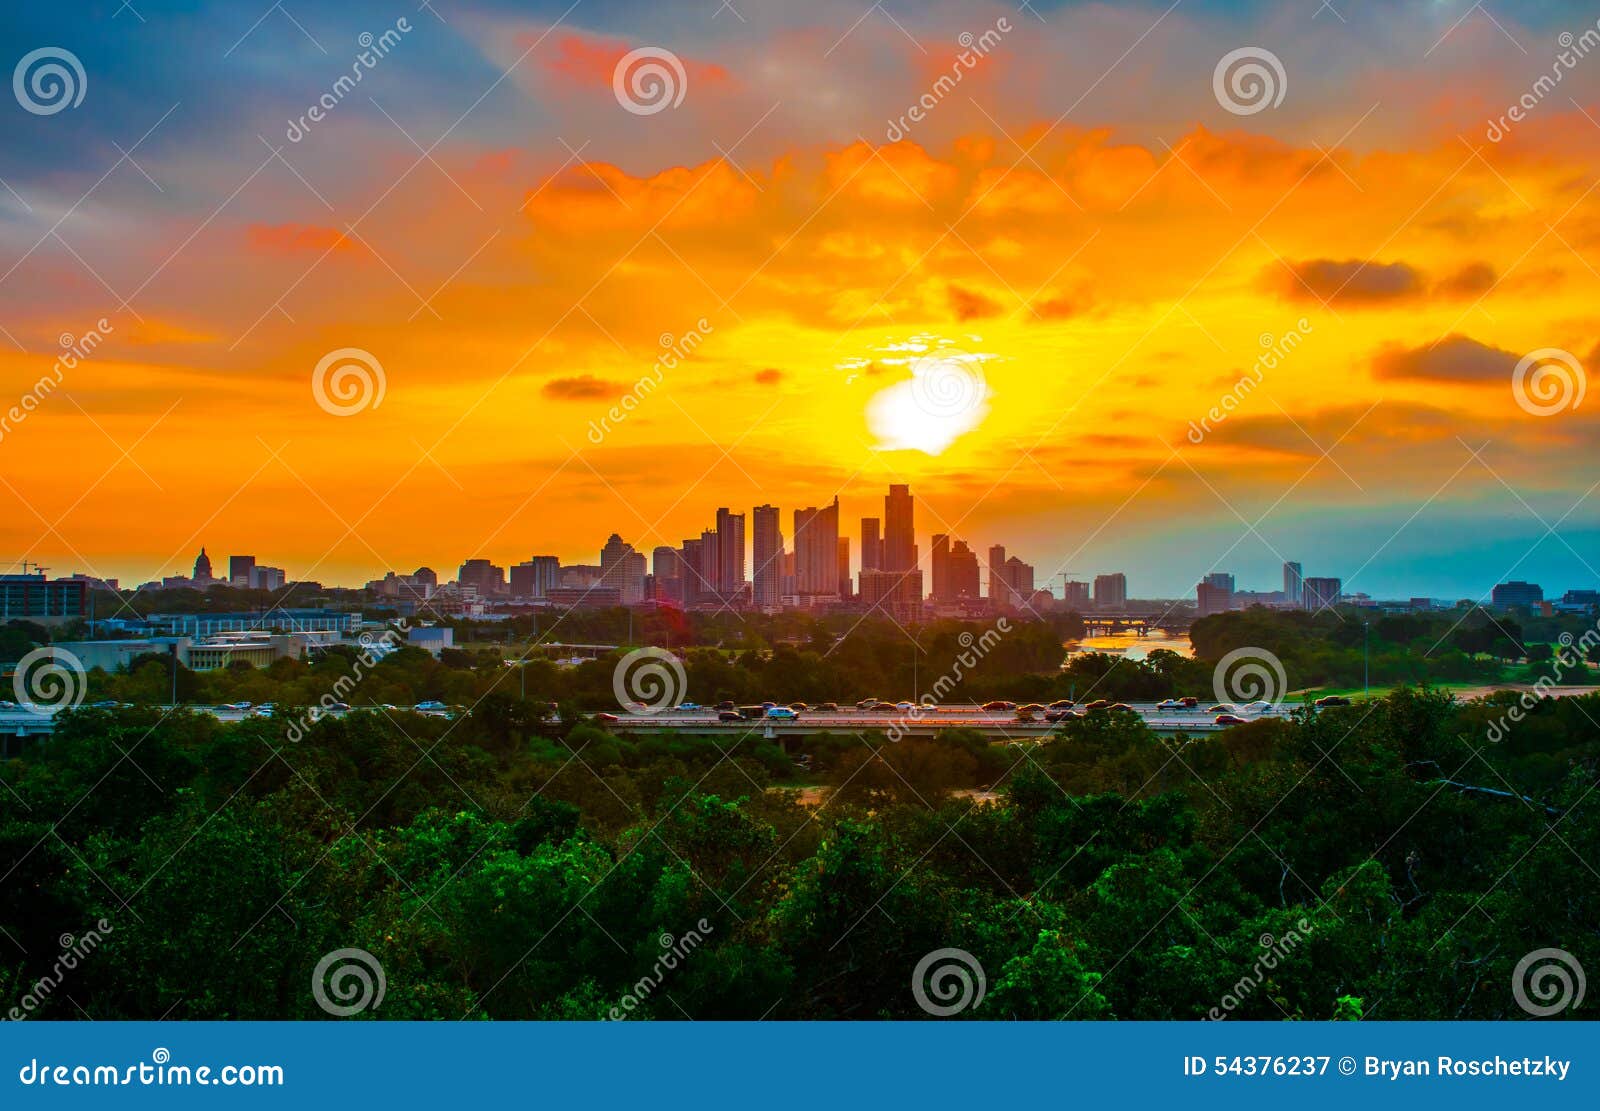 once in a lifetime sunrise austin texas perfect